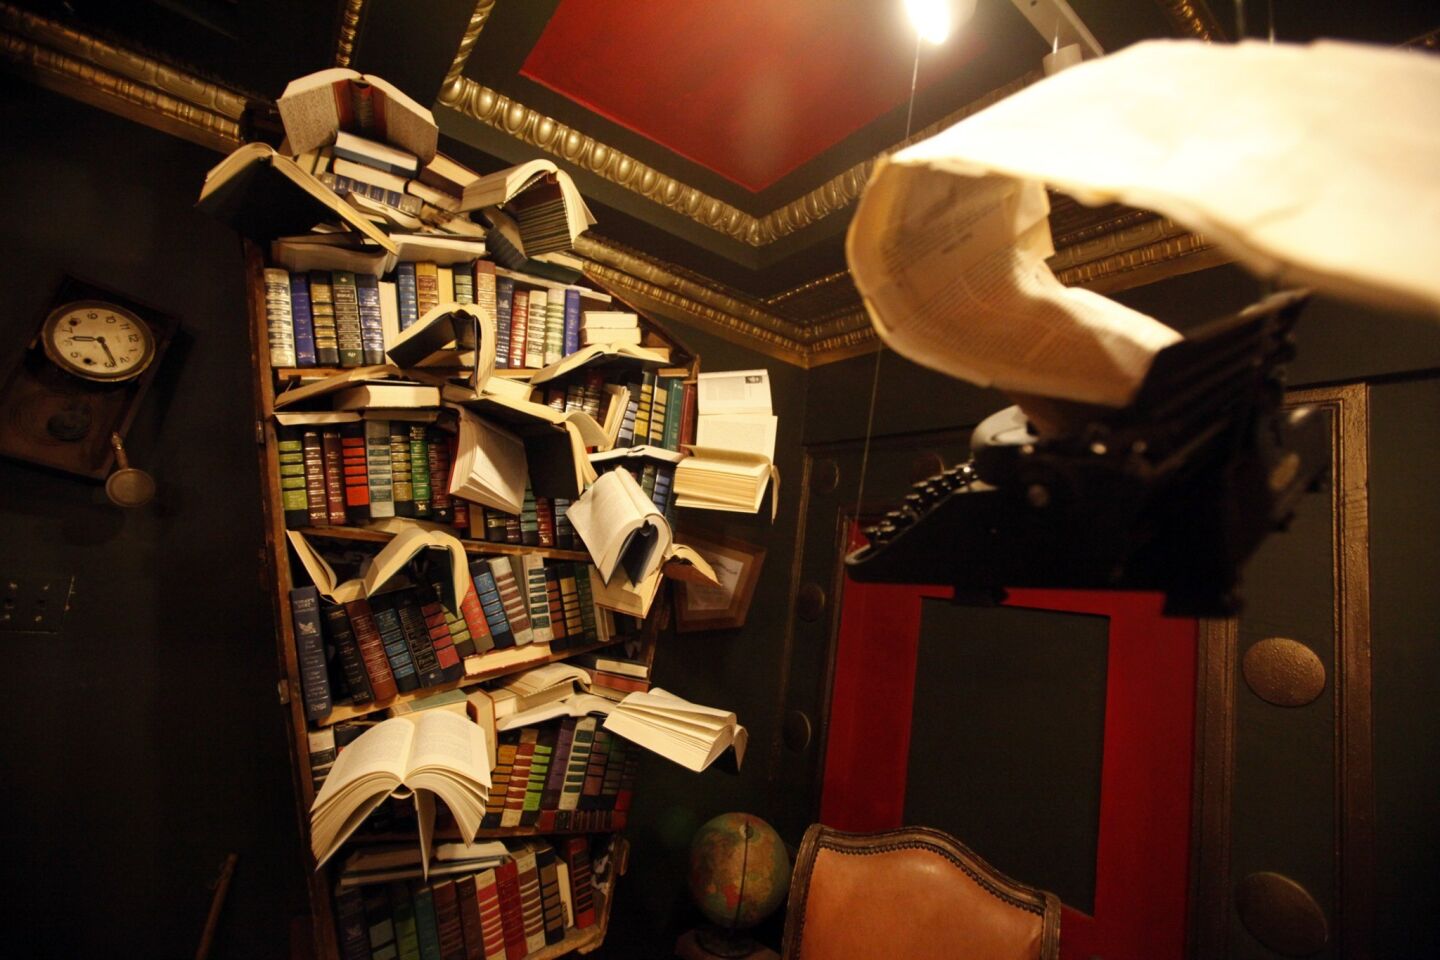 A bookcase featuring flying books created by artist David Lovejoy and titled "Diagnosis" is in the Labyrinth. The floating typewriter and paper flowing from it were created by artist Jena Priebe.